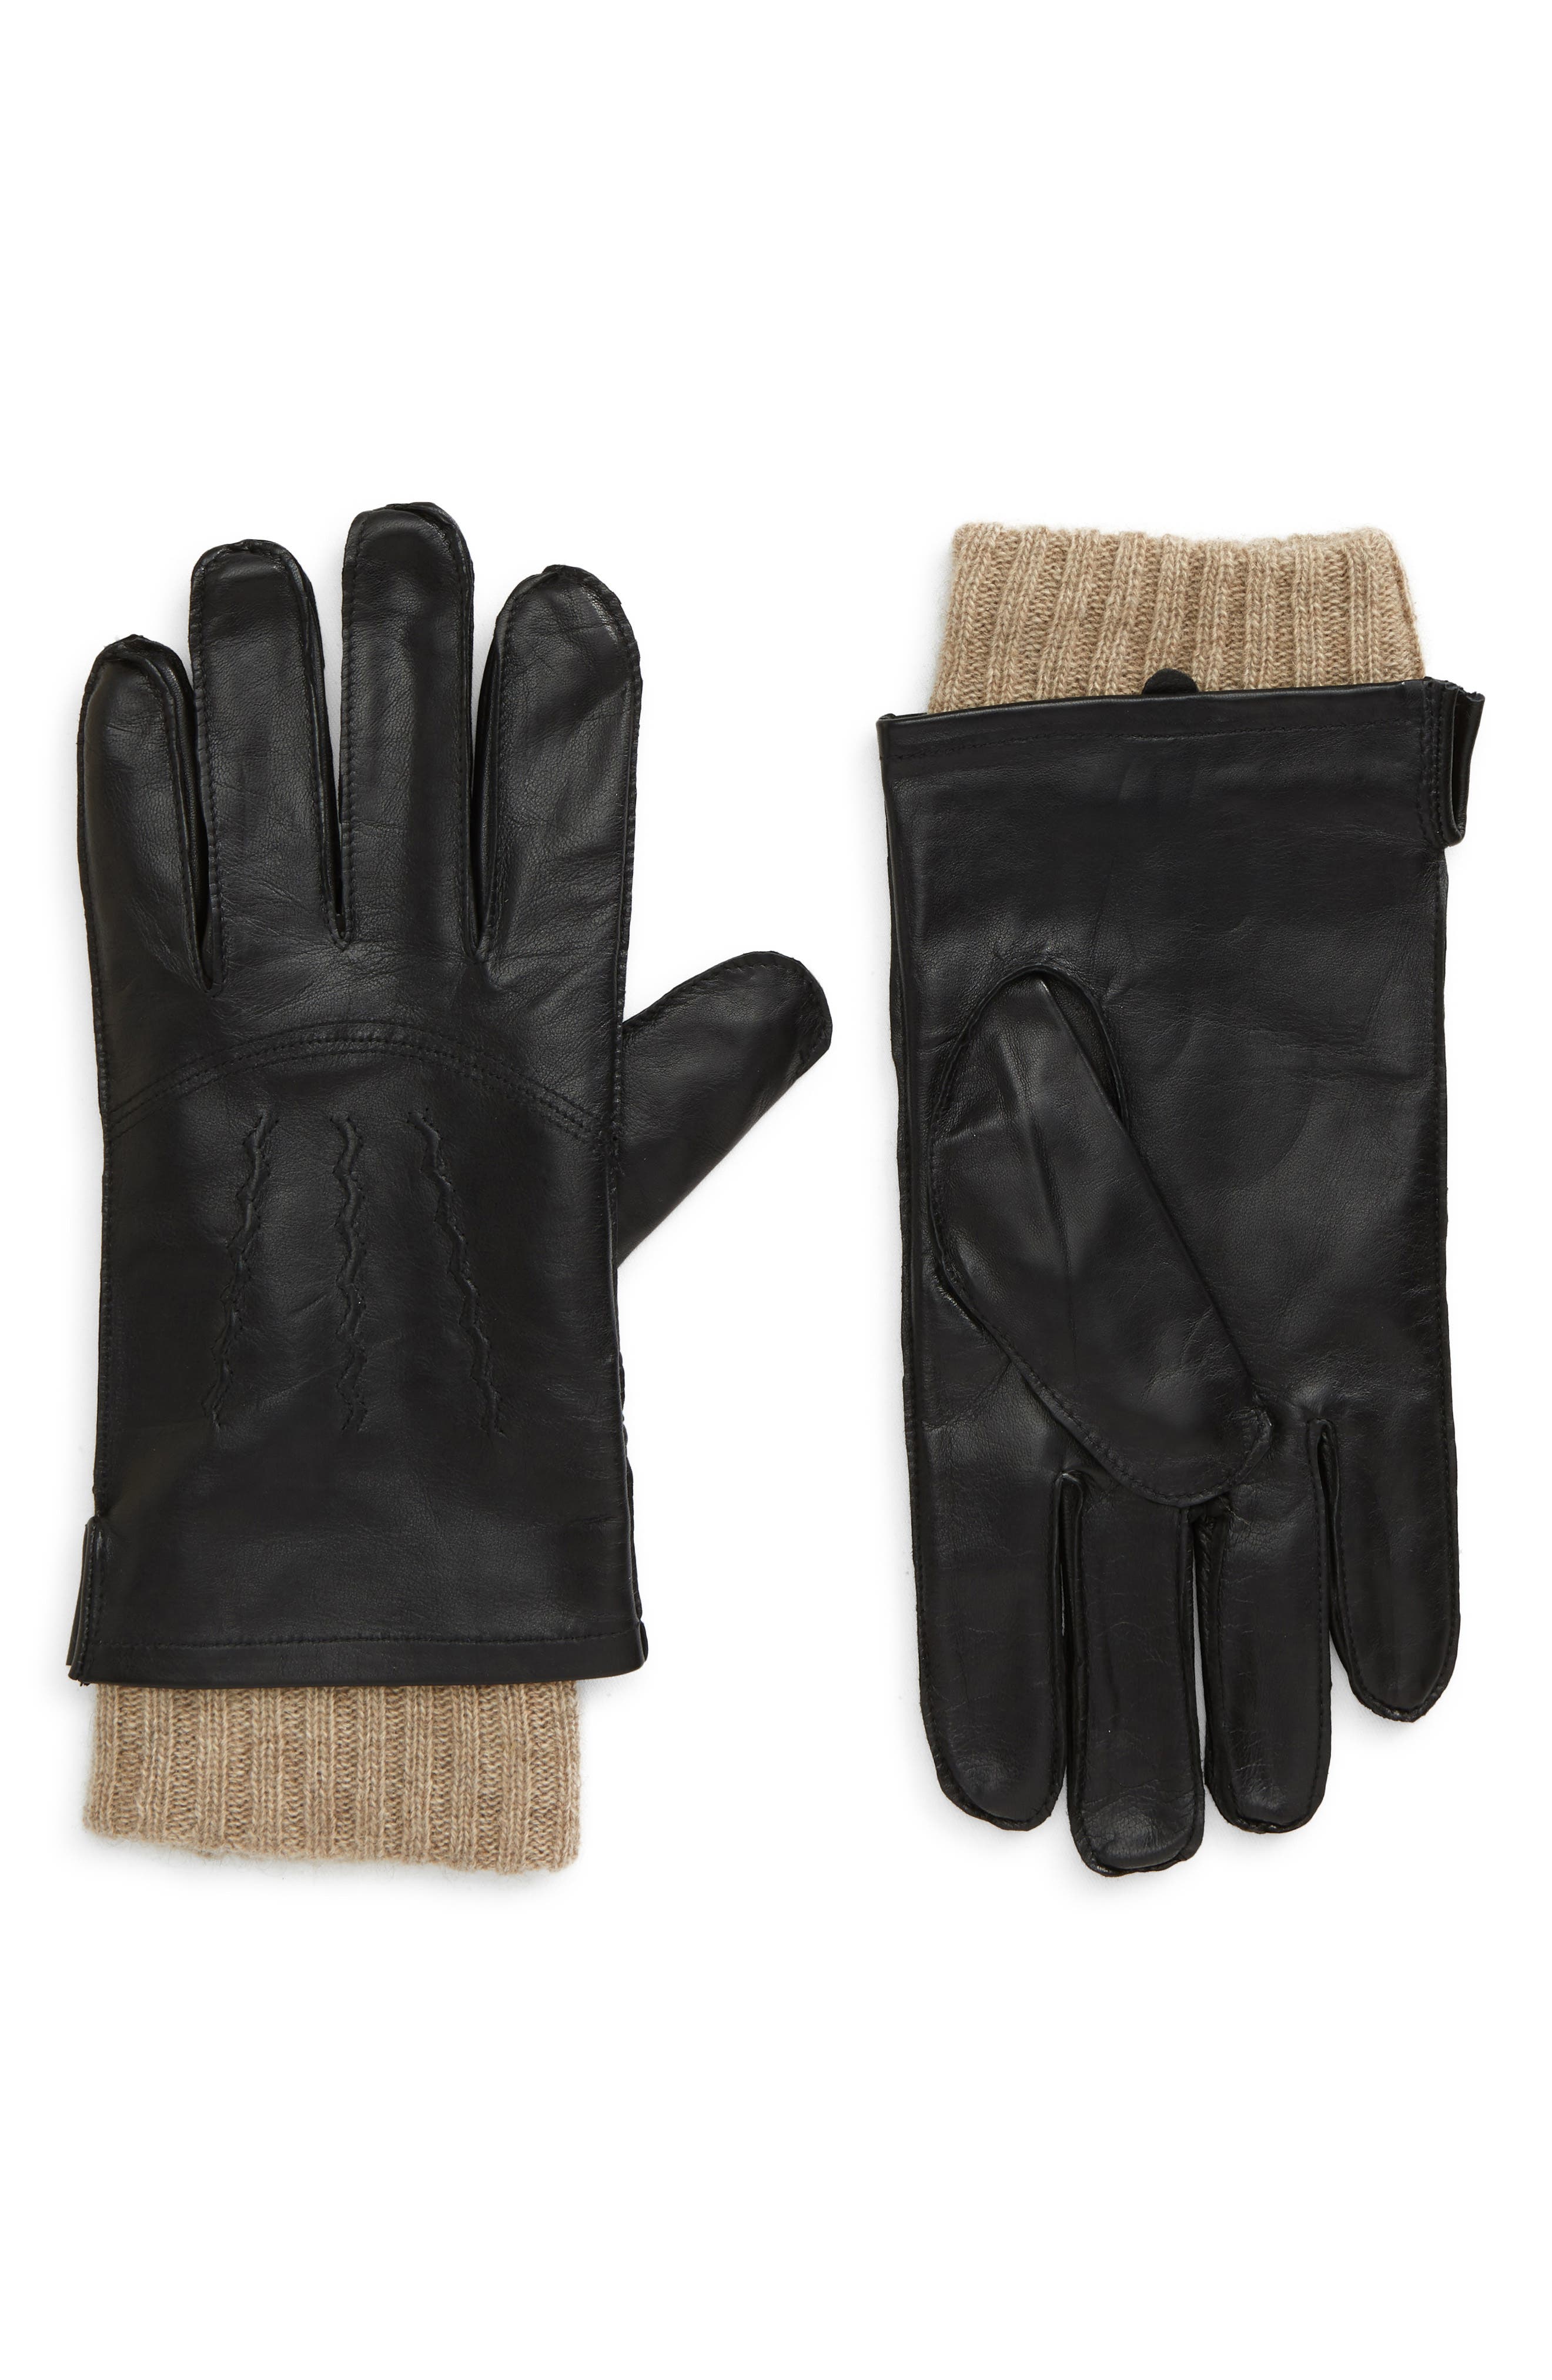 S/M NWT $89 Nordstrom Leather Gloves Cashmere Lining Sz